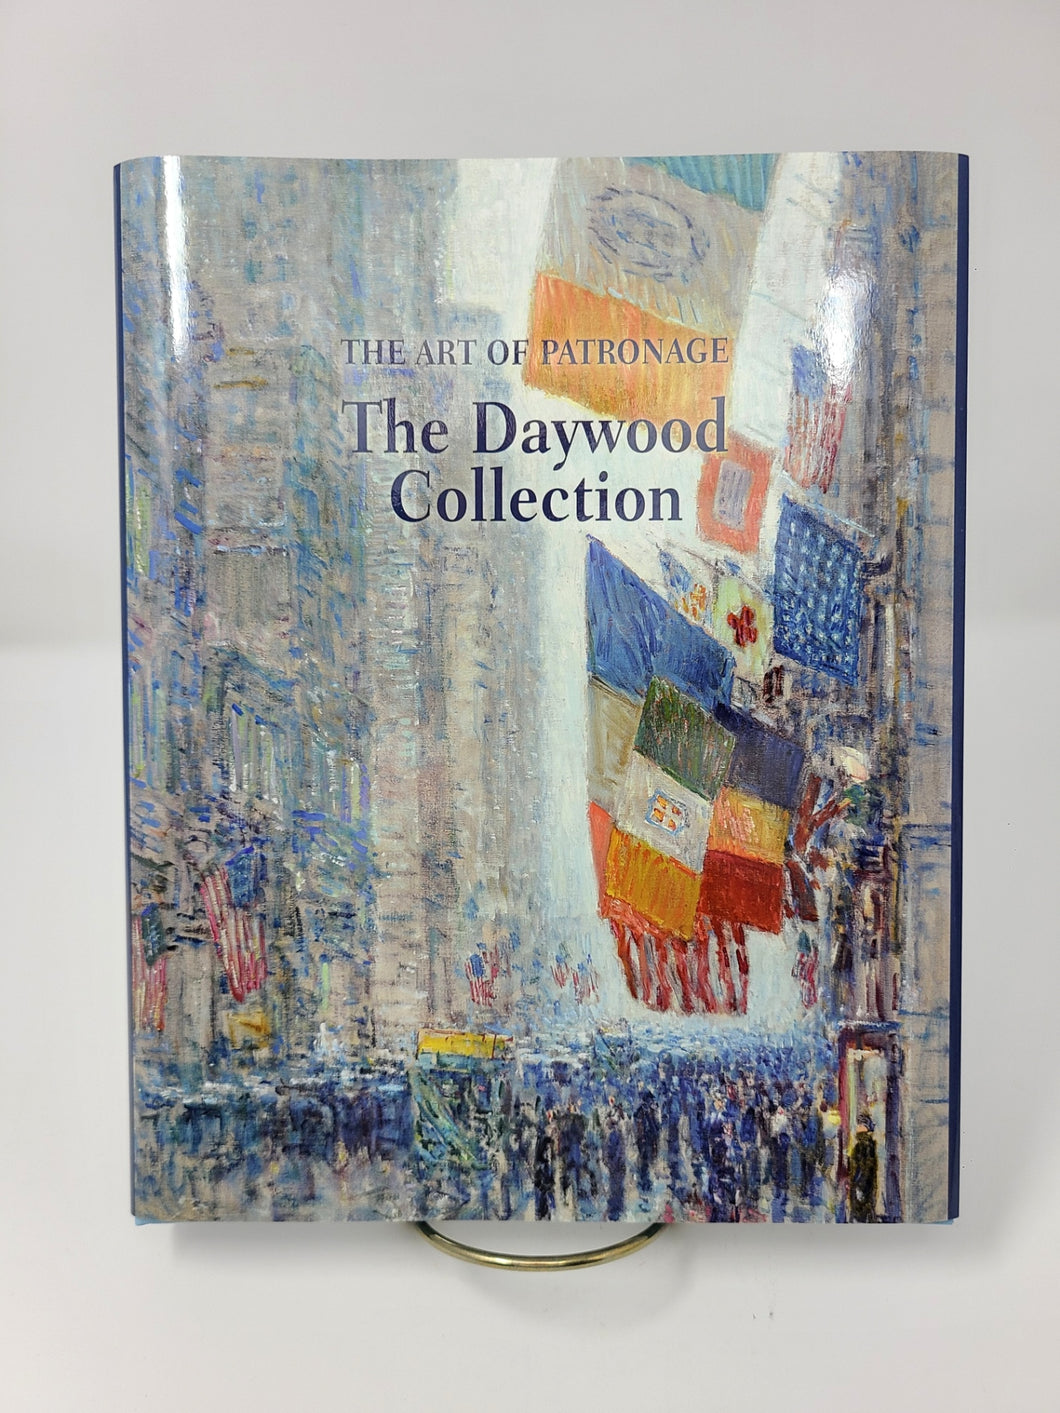 The Art of Patronage: The Daywood Collection